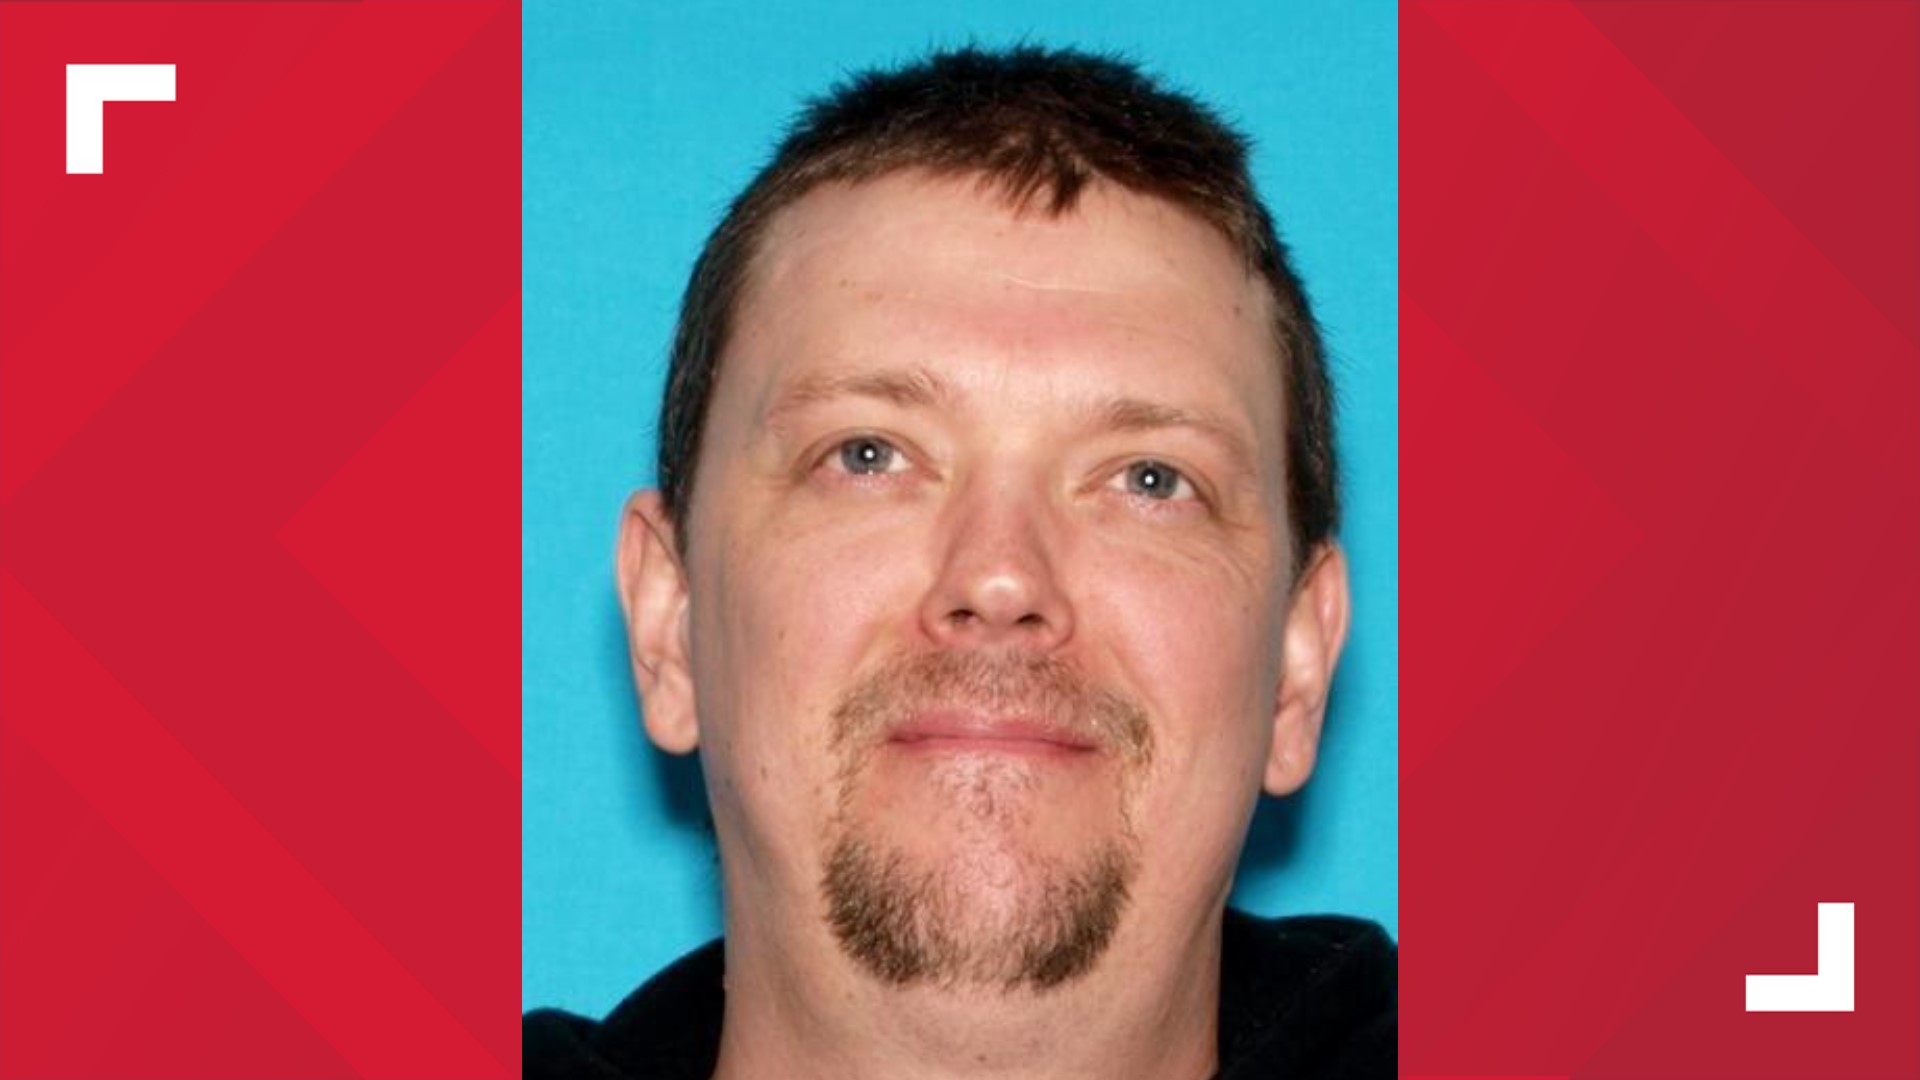 Authorities said Jeremiah Adams, 47, of Bethel, was last seen driving a green Jeep Wrangler with Maine license plate 8845YE. He's considered "armed and dangerous".